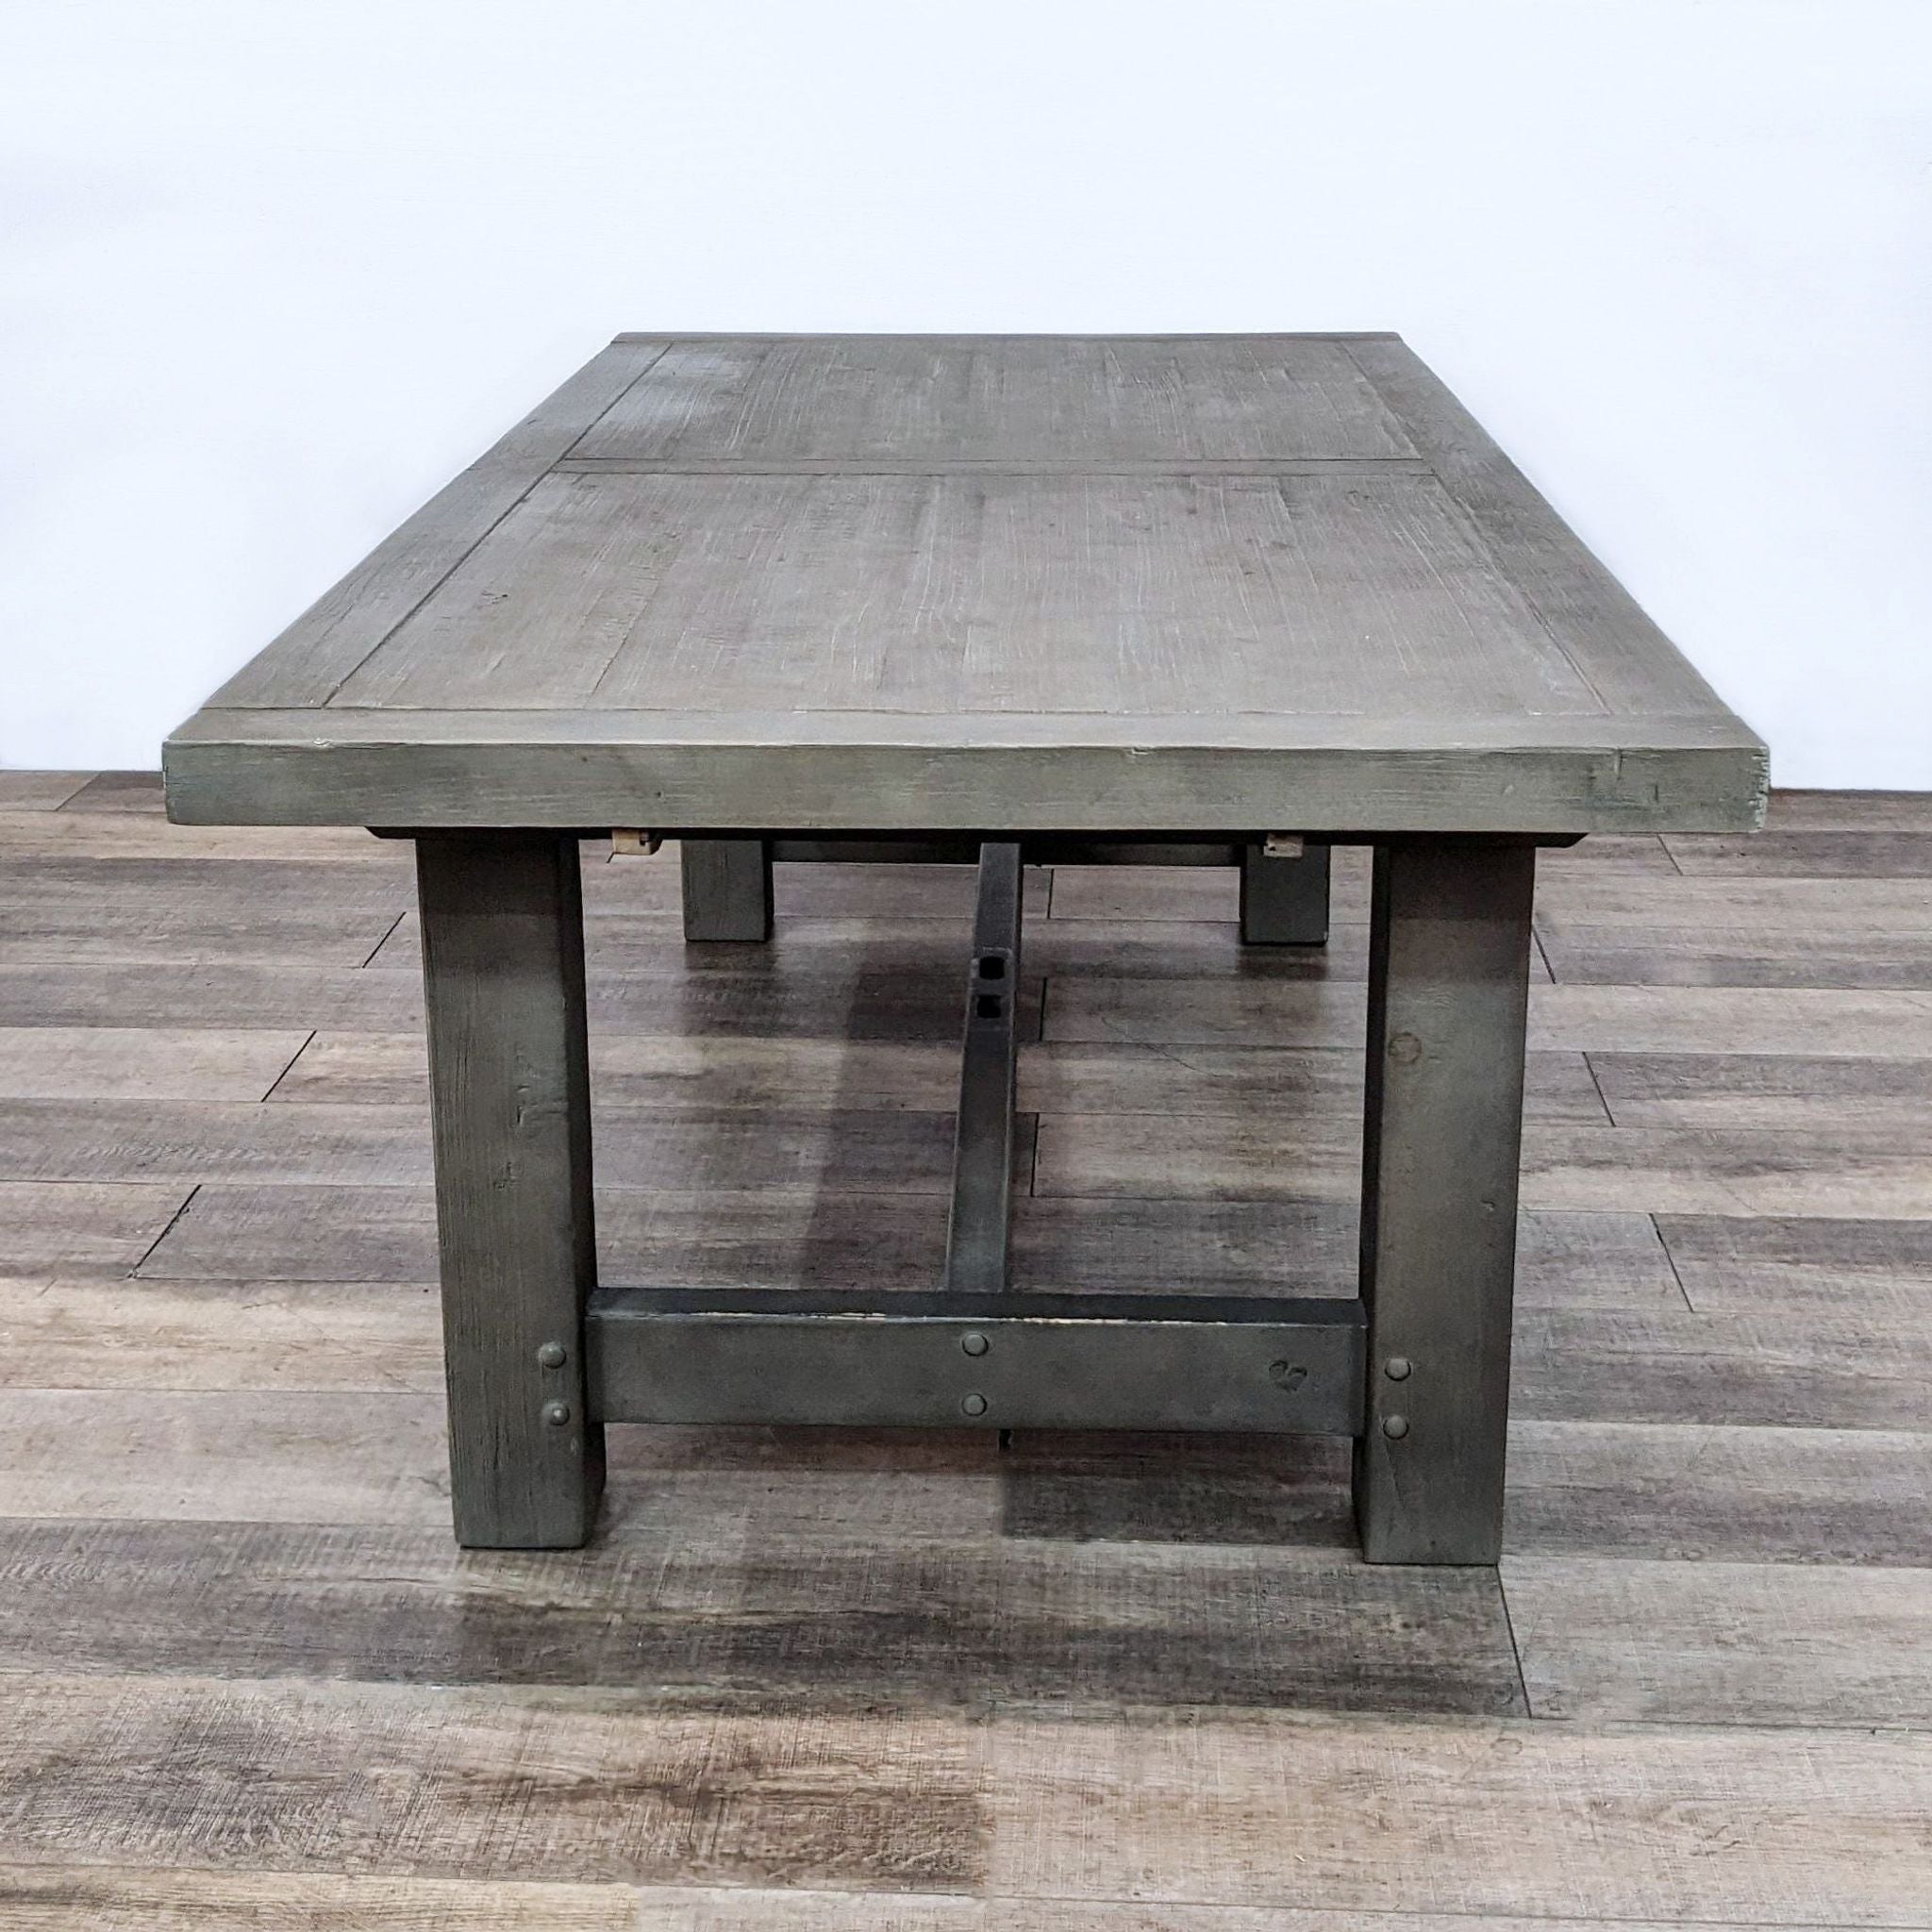 Reperch brand wooden dining table with rustic veneer finish and robust trestle base, farmhouse design.